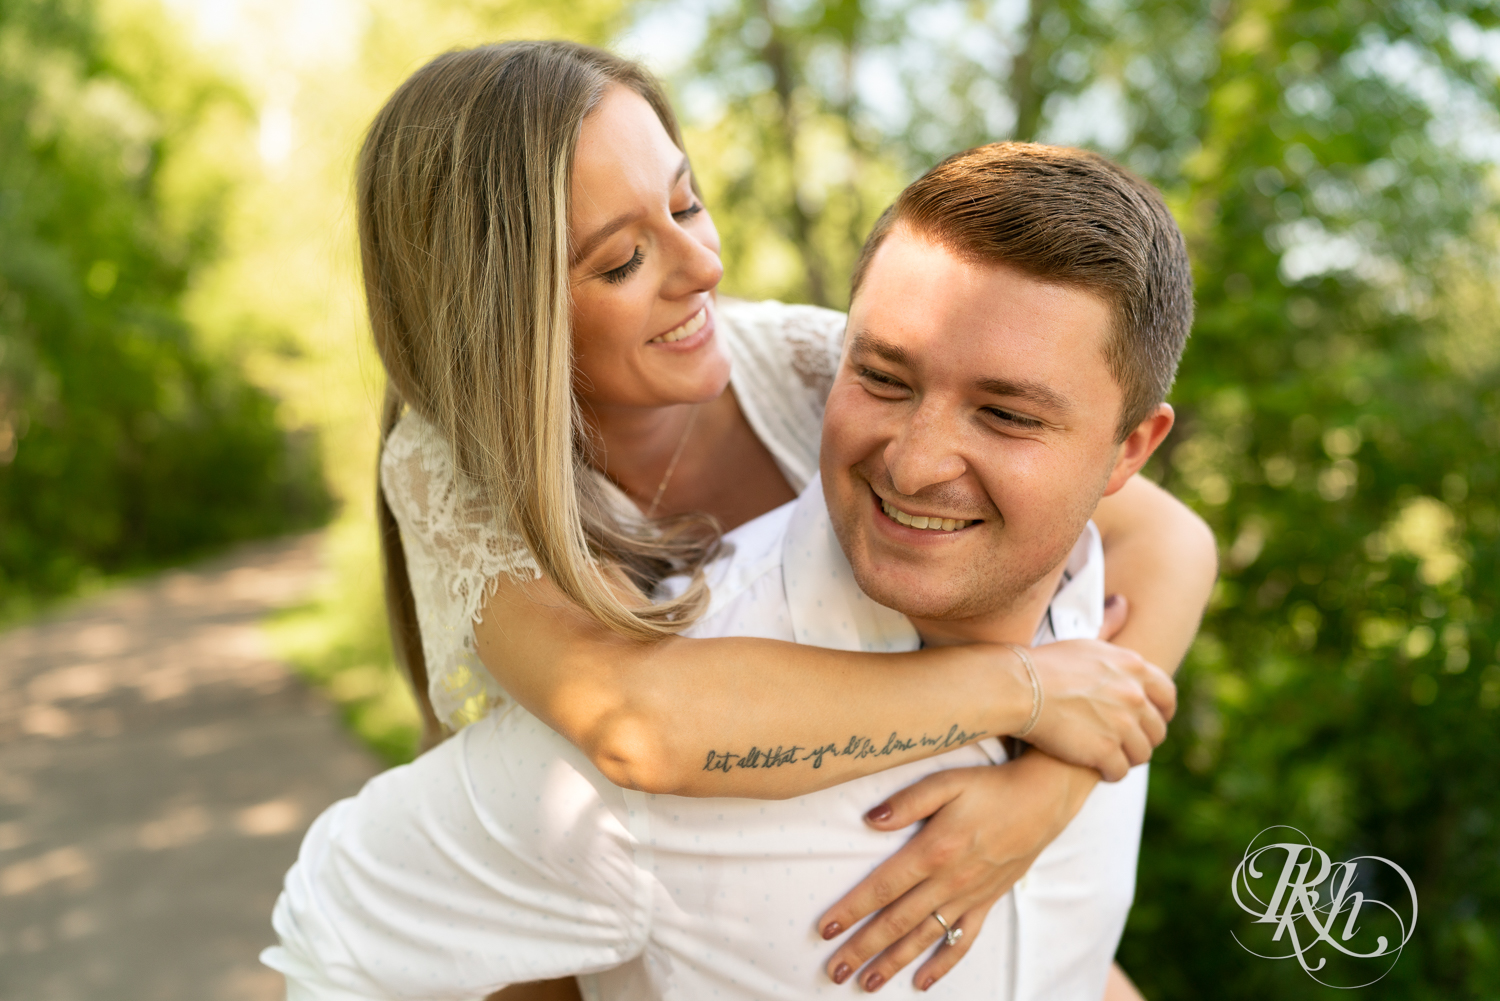 Man gives woman a piggyback ride during summer engagement photography in Minnesota.